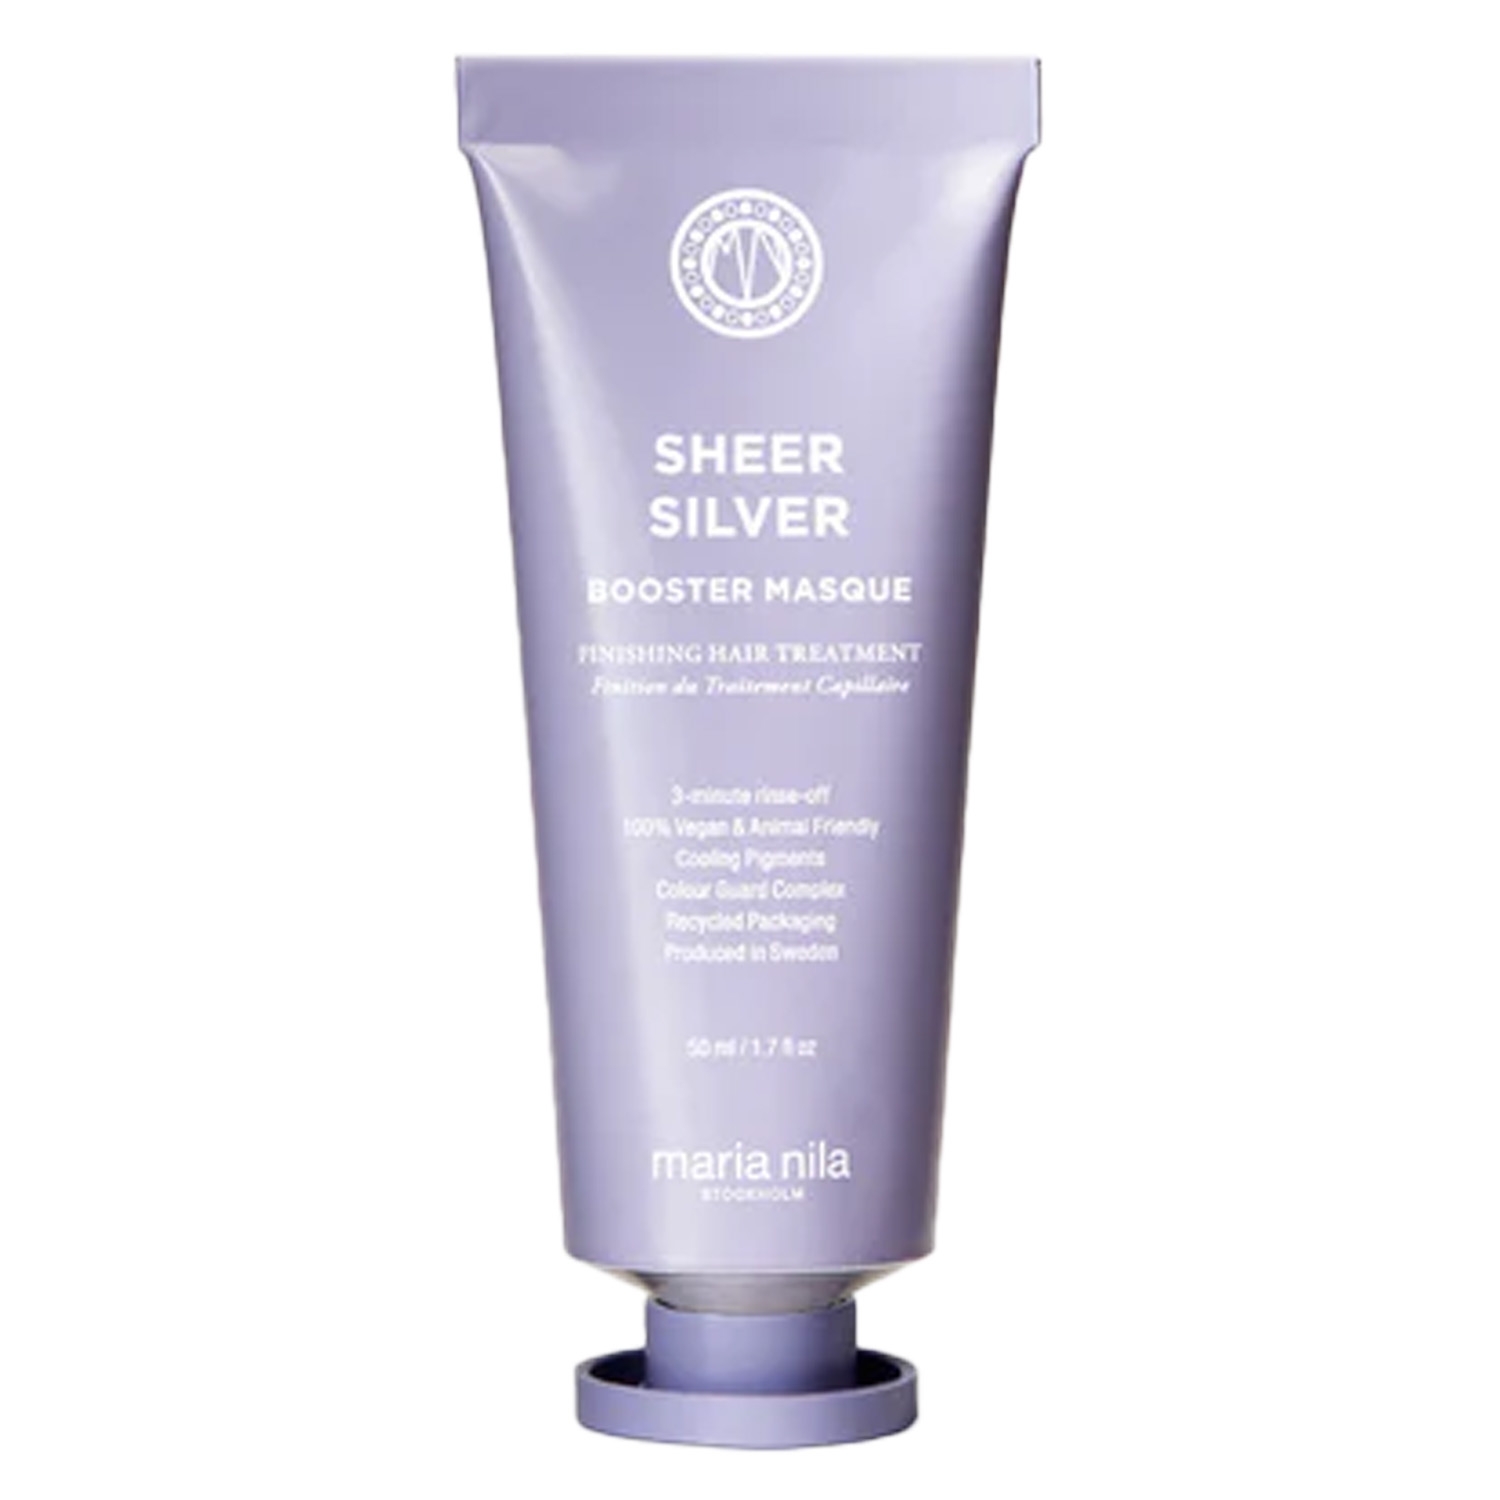 Product image from Care & Style - Sheer Silver Booster Mask